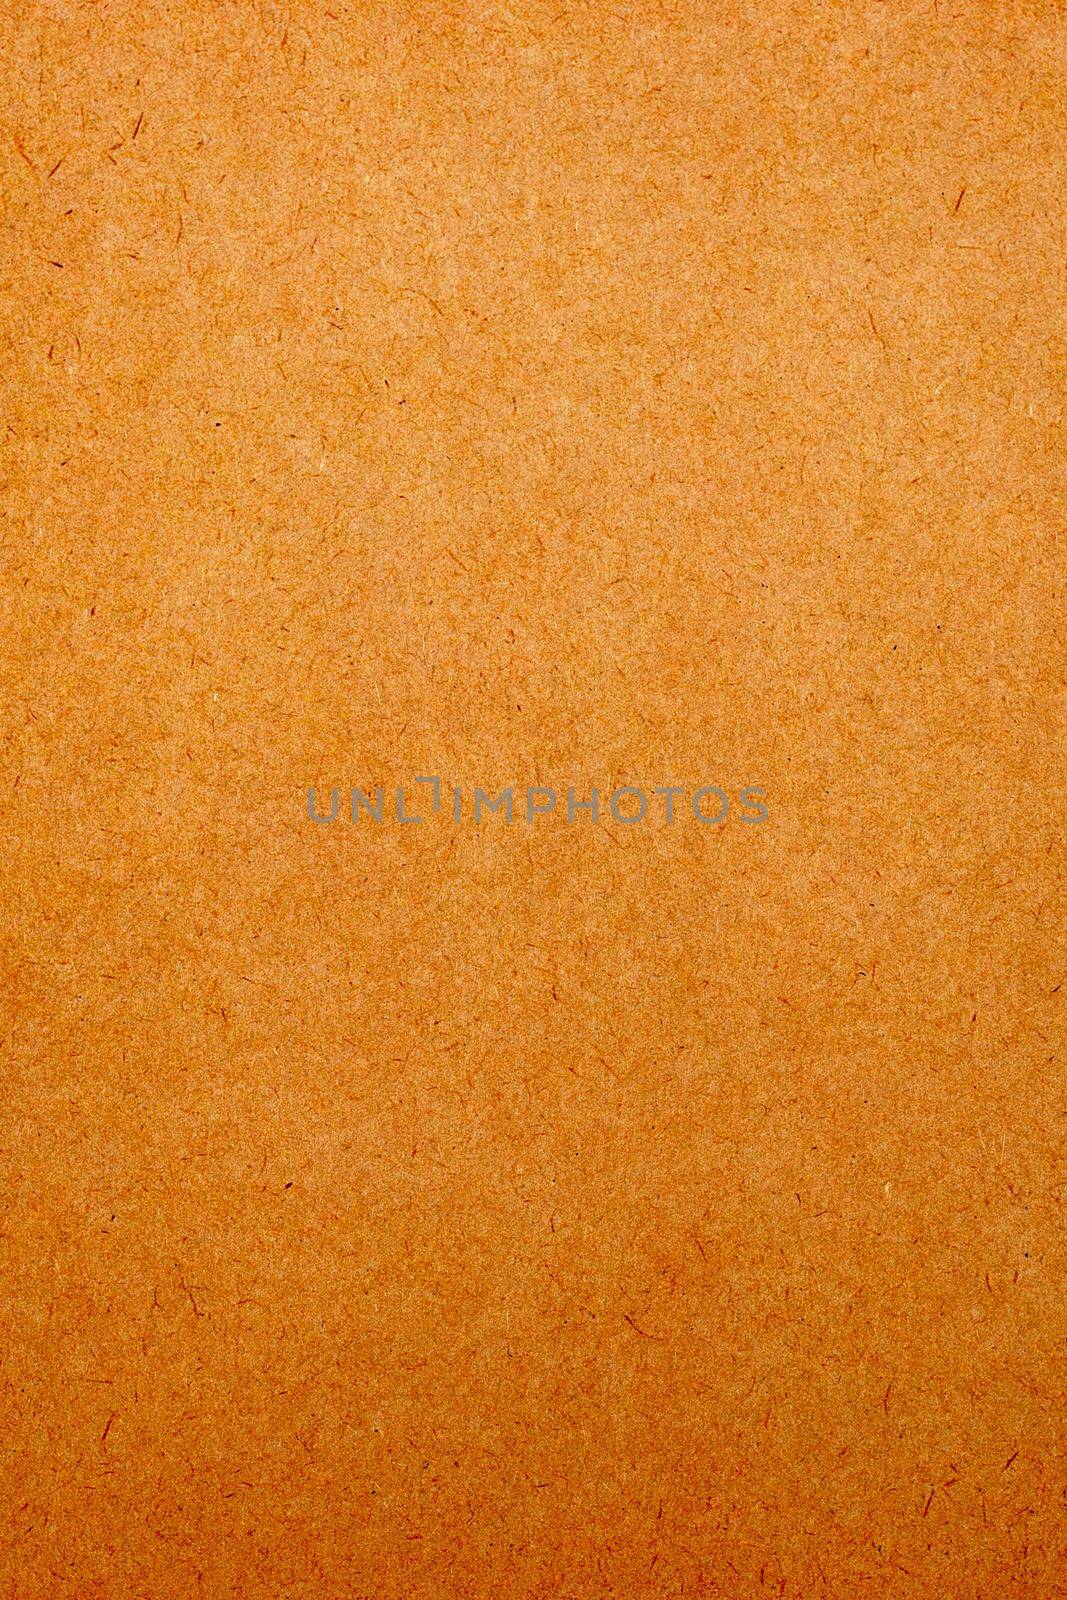 Sheet of brown paper or cardboard texture for background.